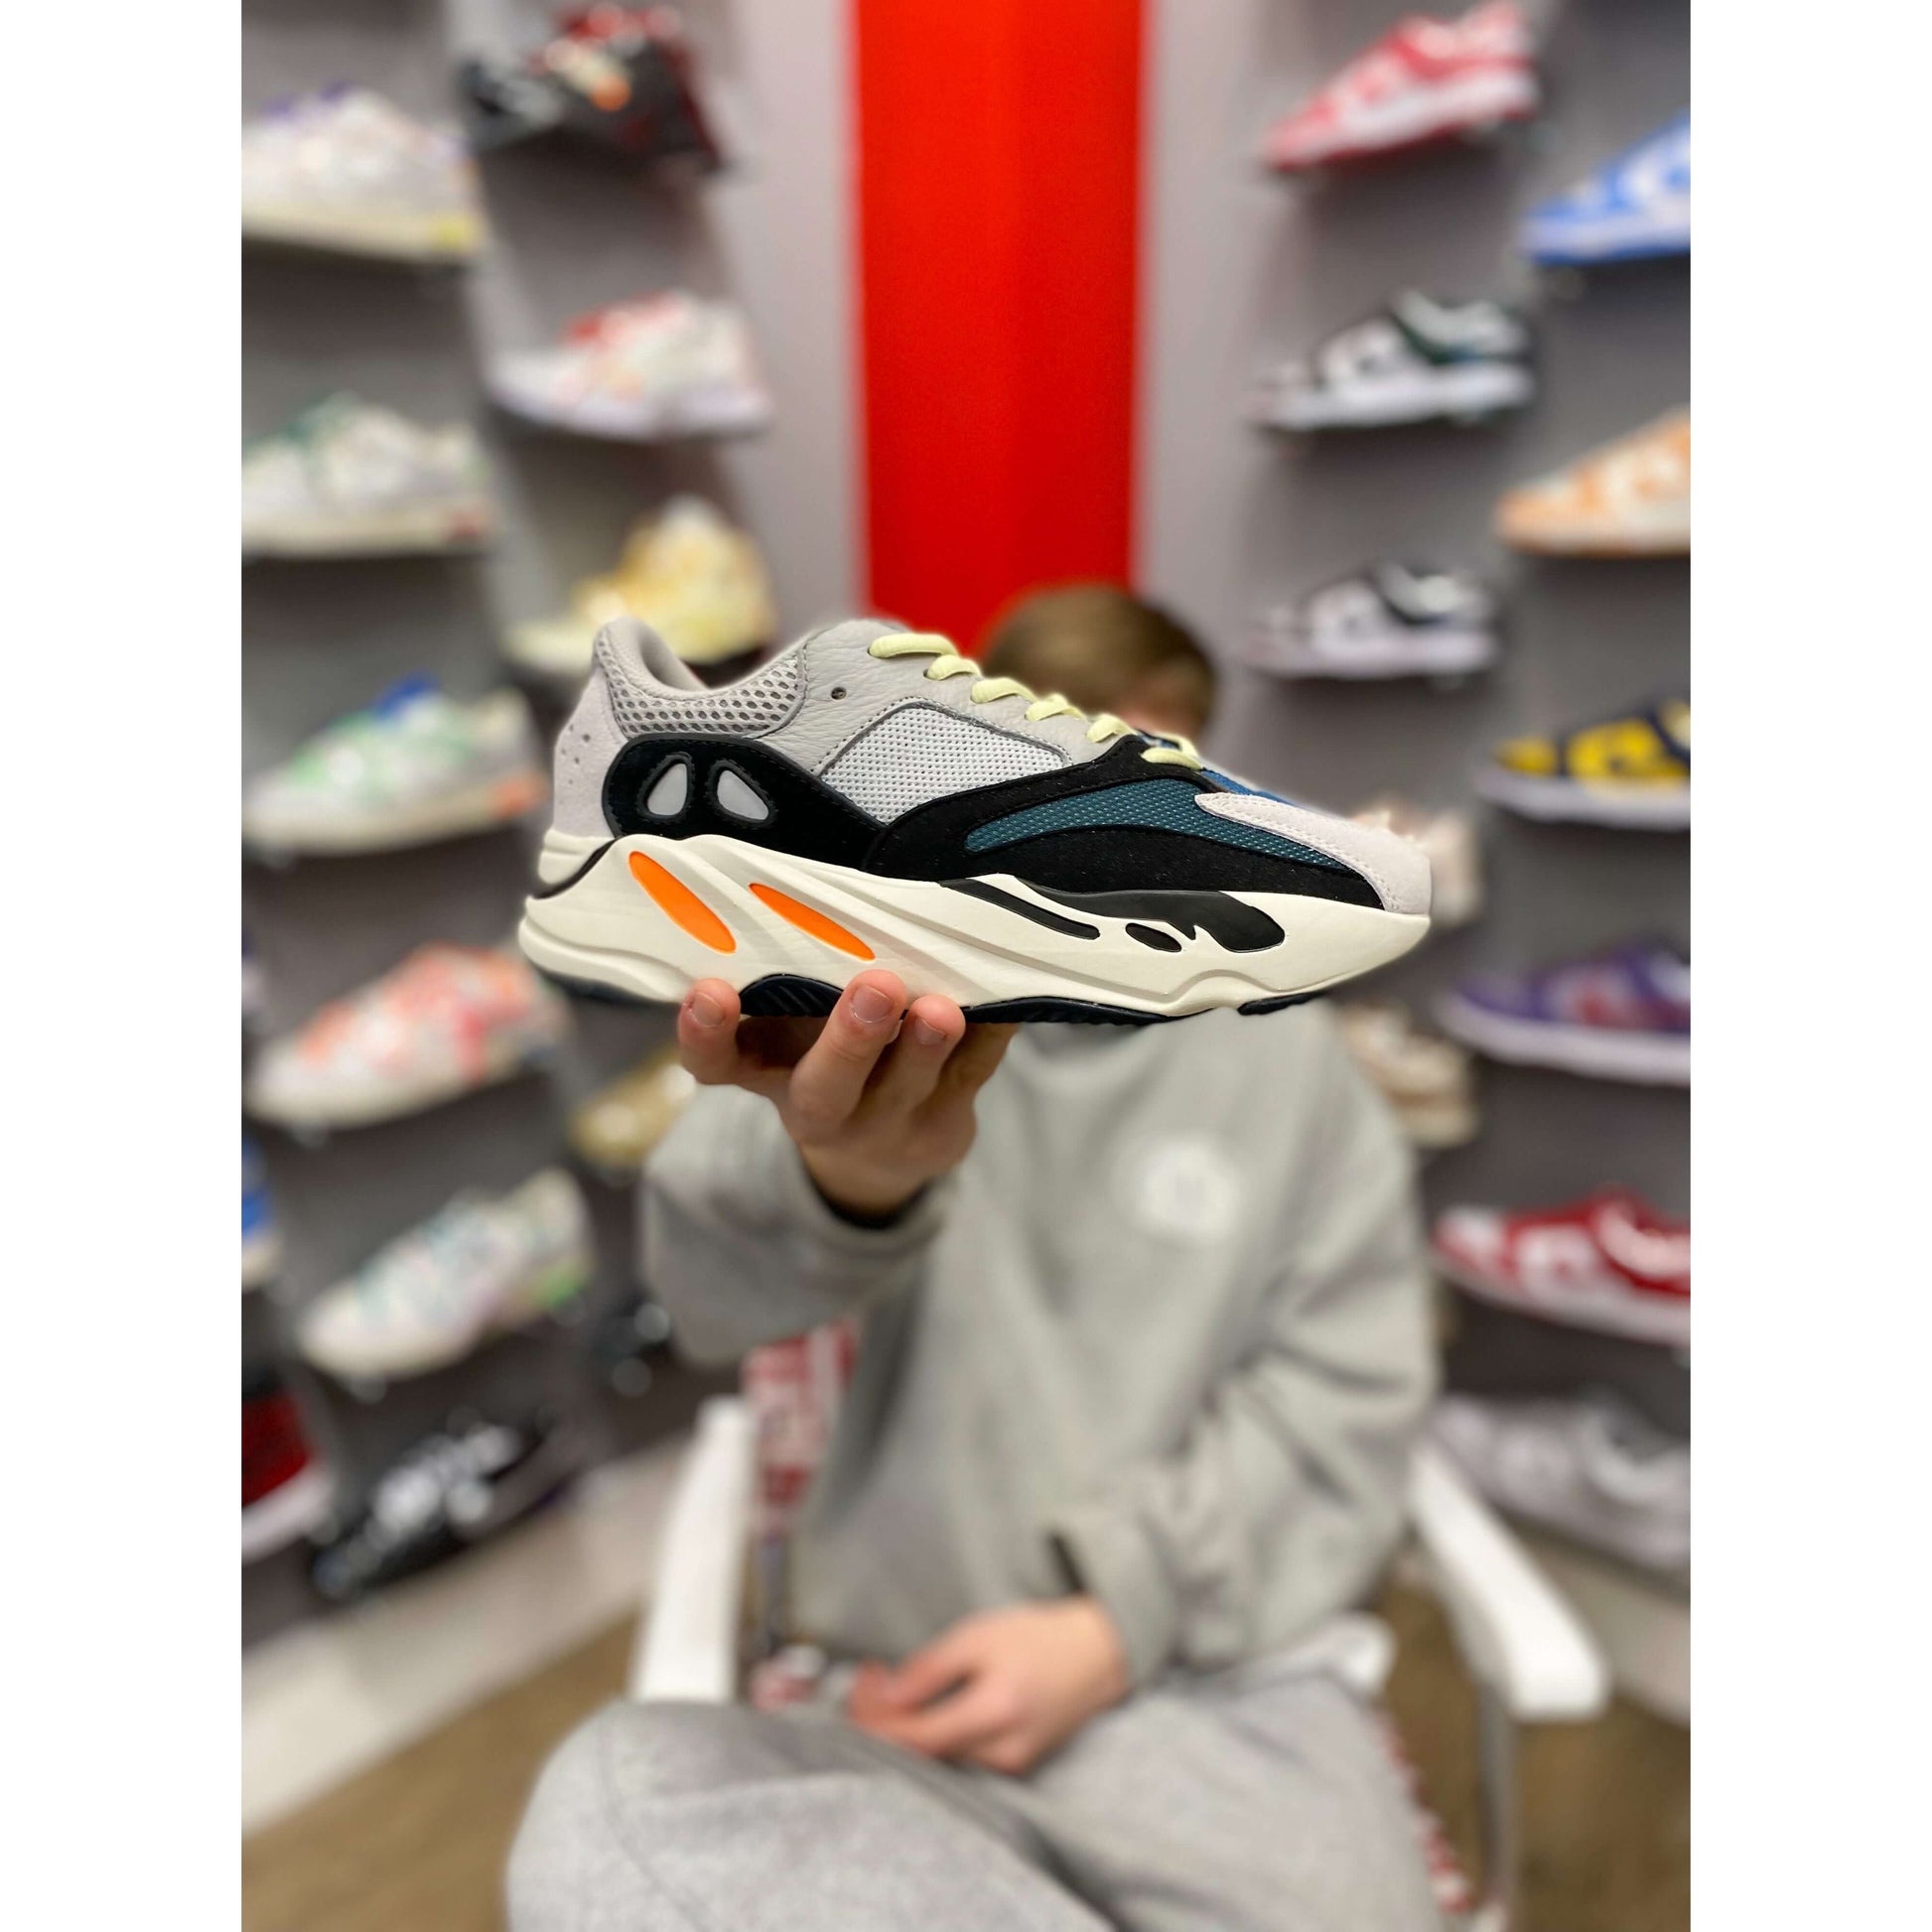 Adidas Yeezy Boost 700 Wave Runner by Yeezy from £450.00